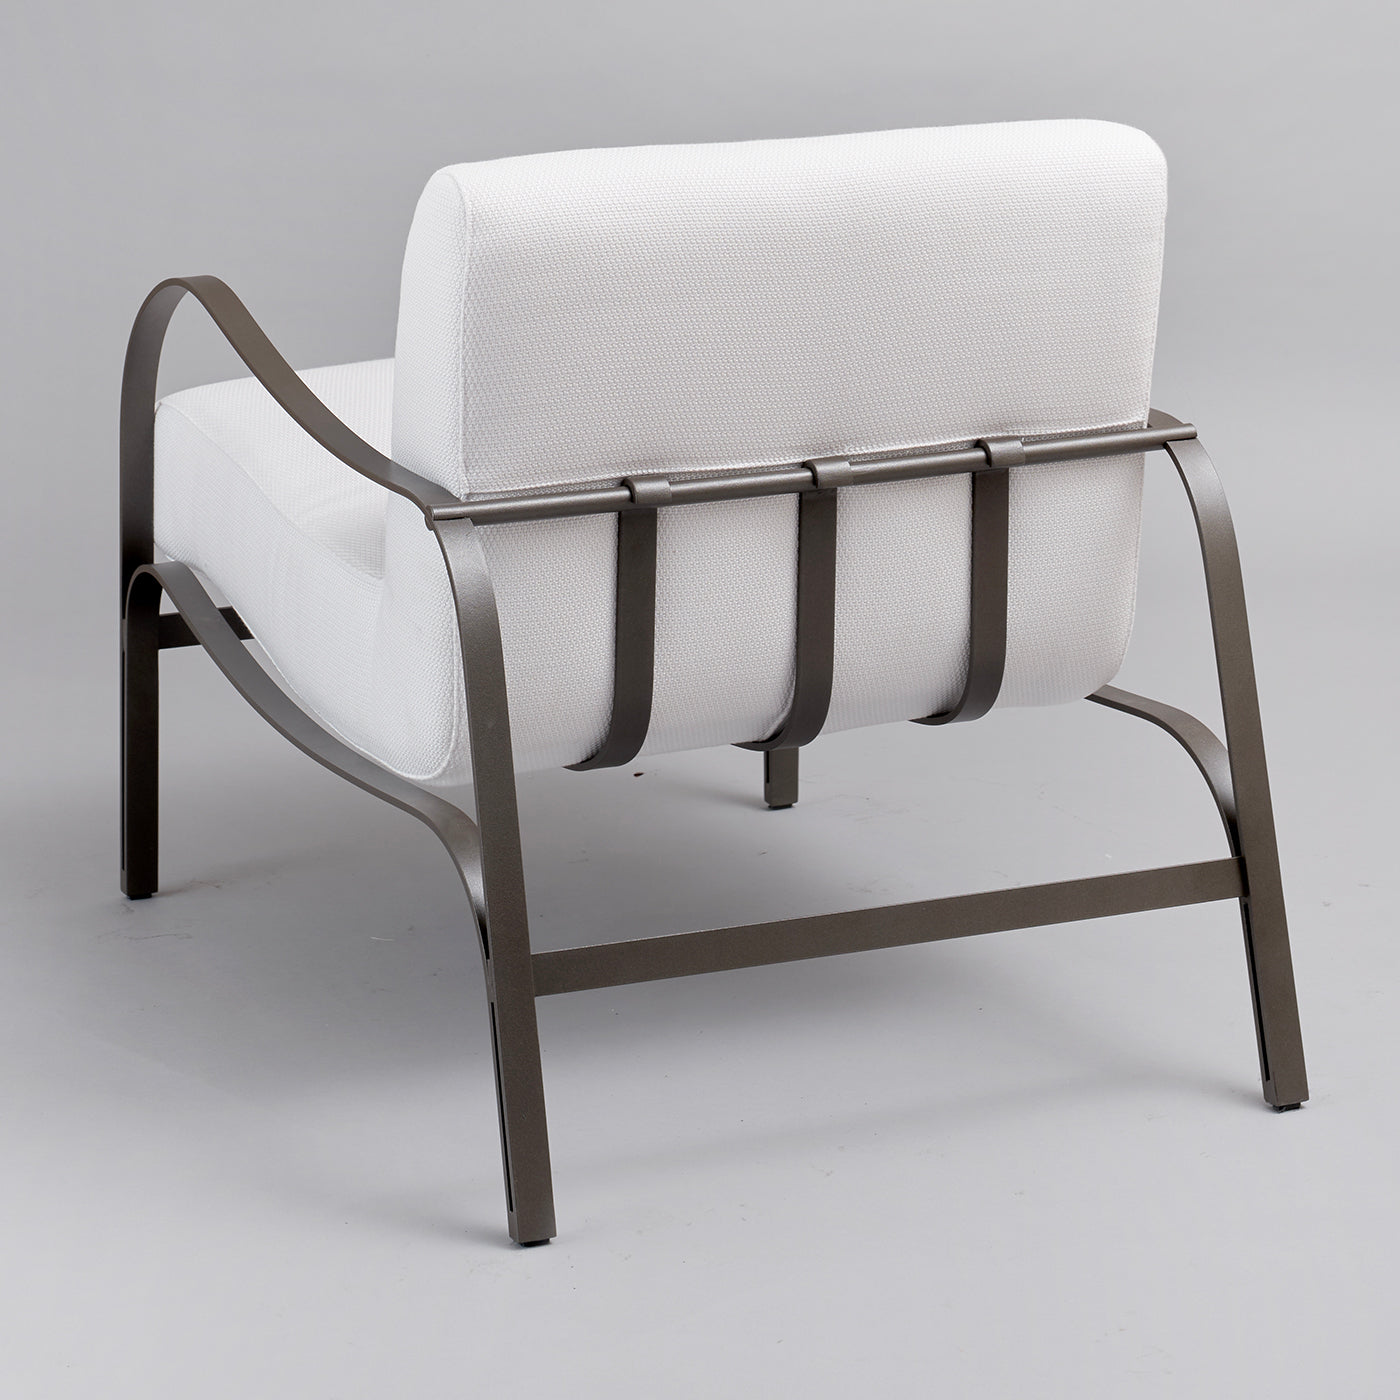 Amalfi White and Gray Armchair by Studio 63 in Stainless Steel - Alternative view 2